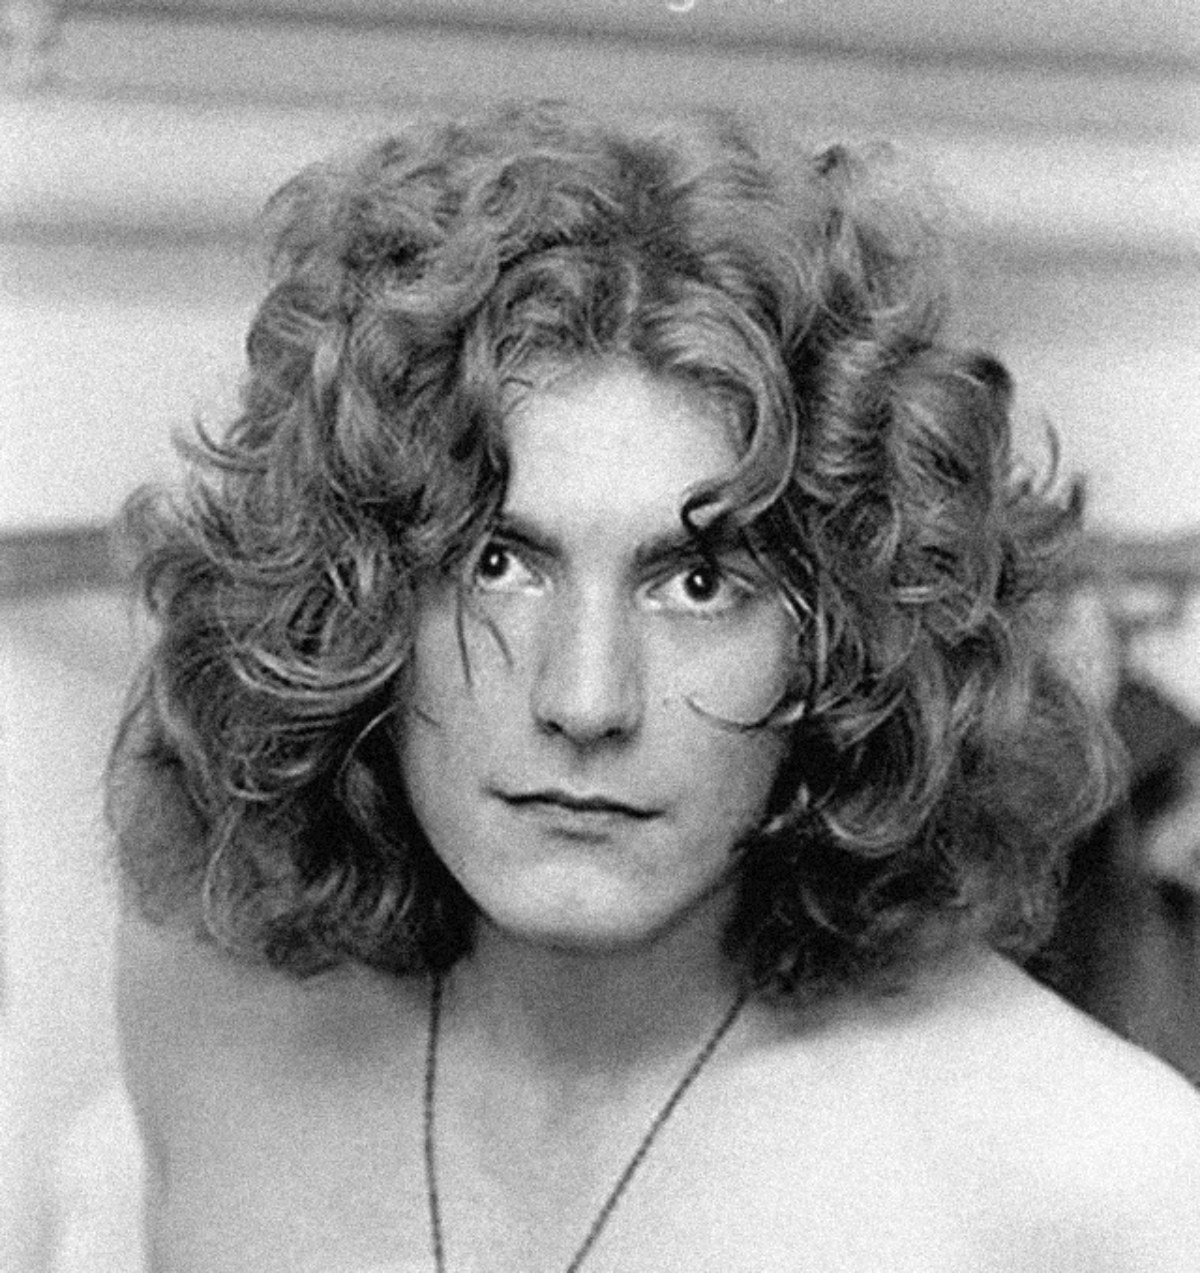 Robert Plant as a young man.